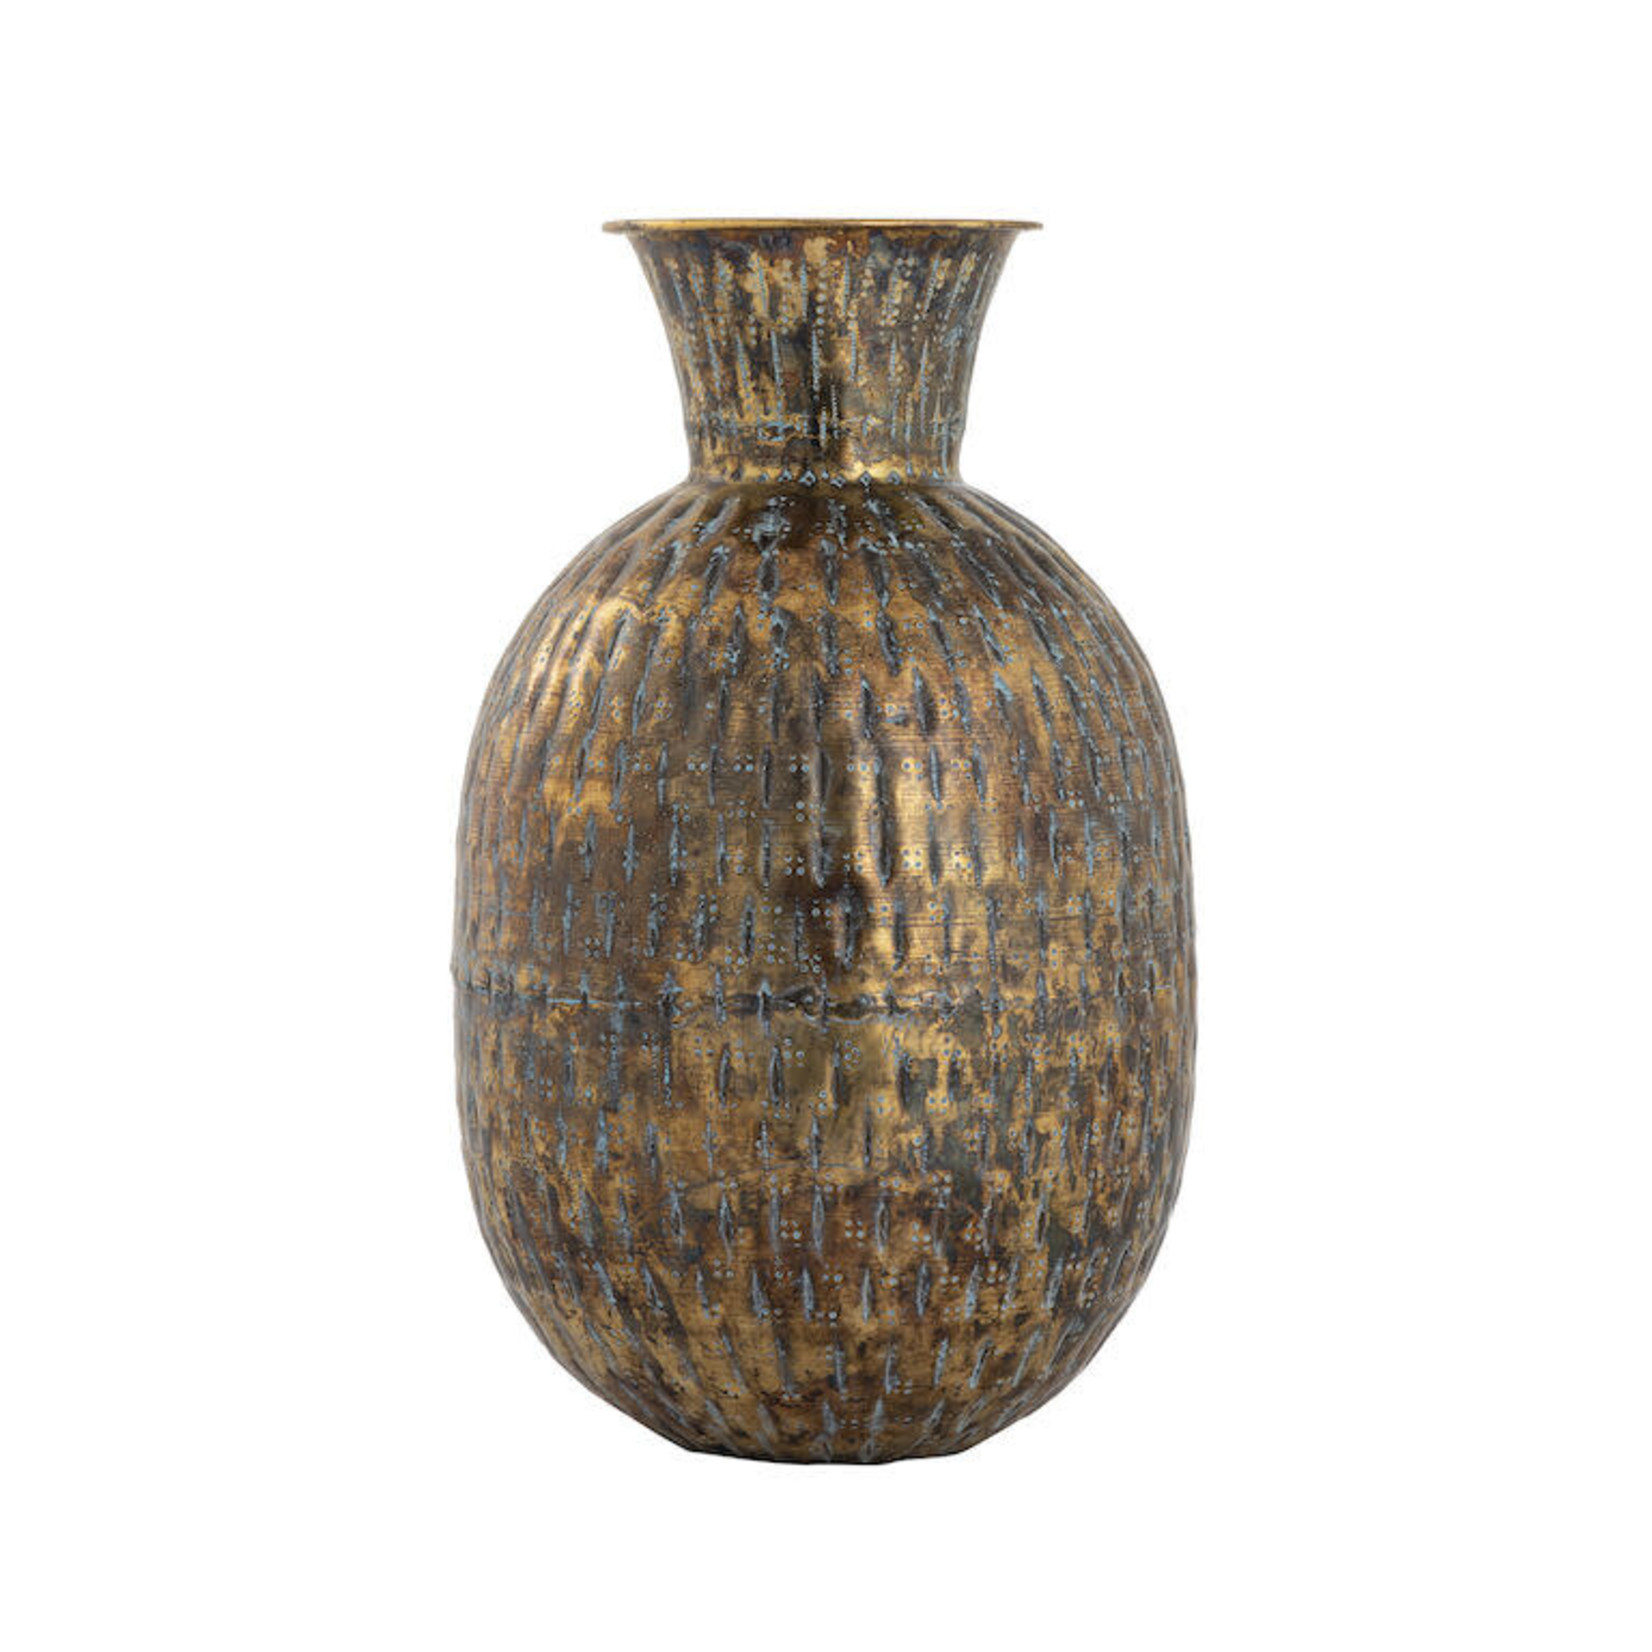 FOWLER ROUNDED VASE